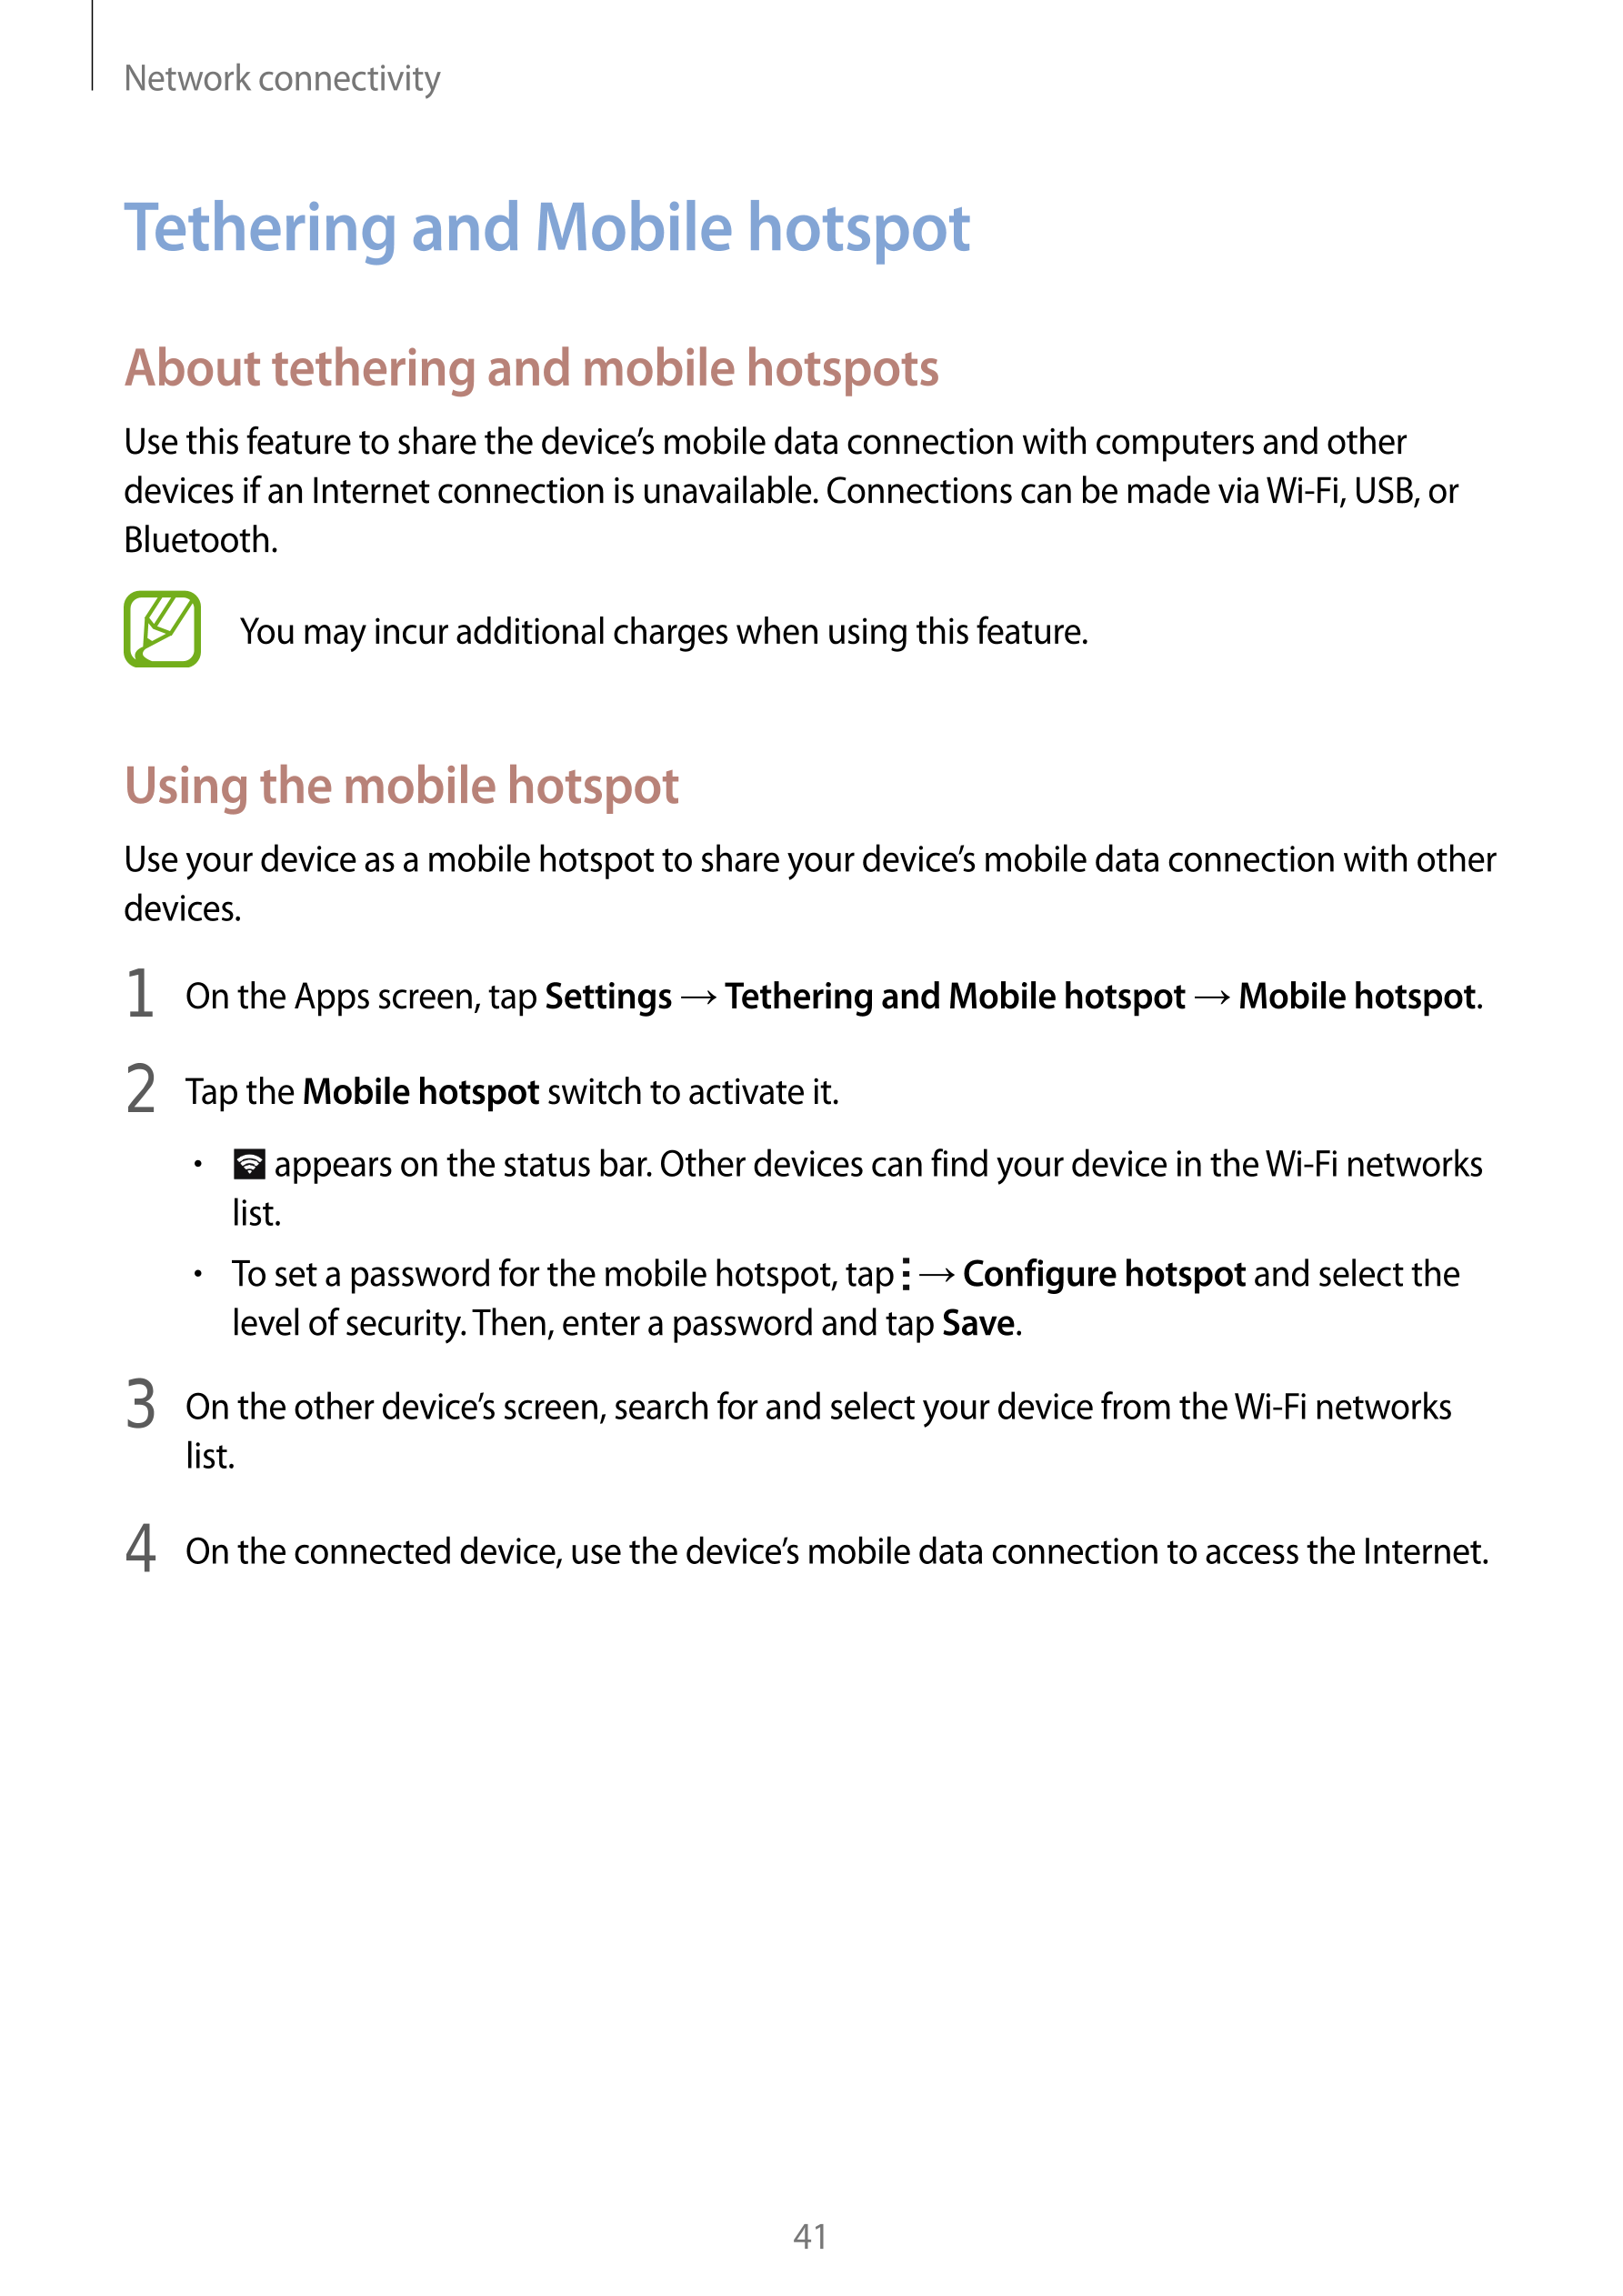 Network connectivity
Tethering and Mobile hotspot
About tethering and mobile hotspots
Use this feature to share the device’s mob